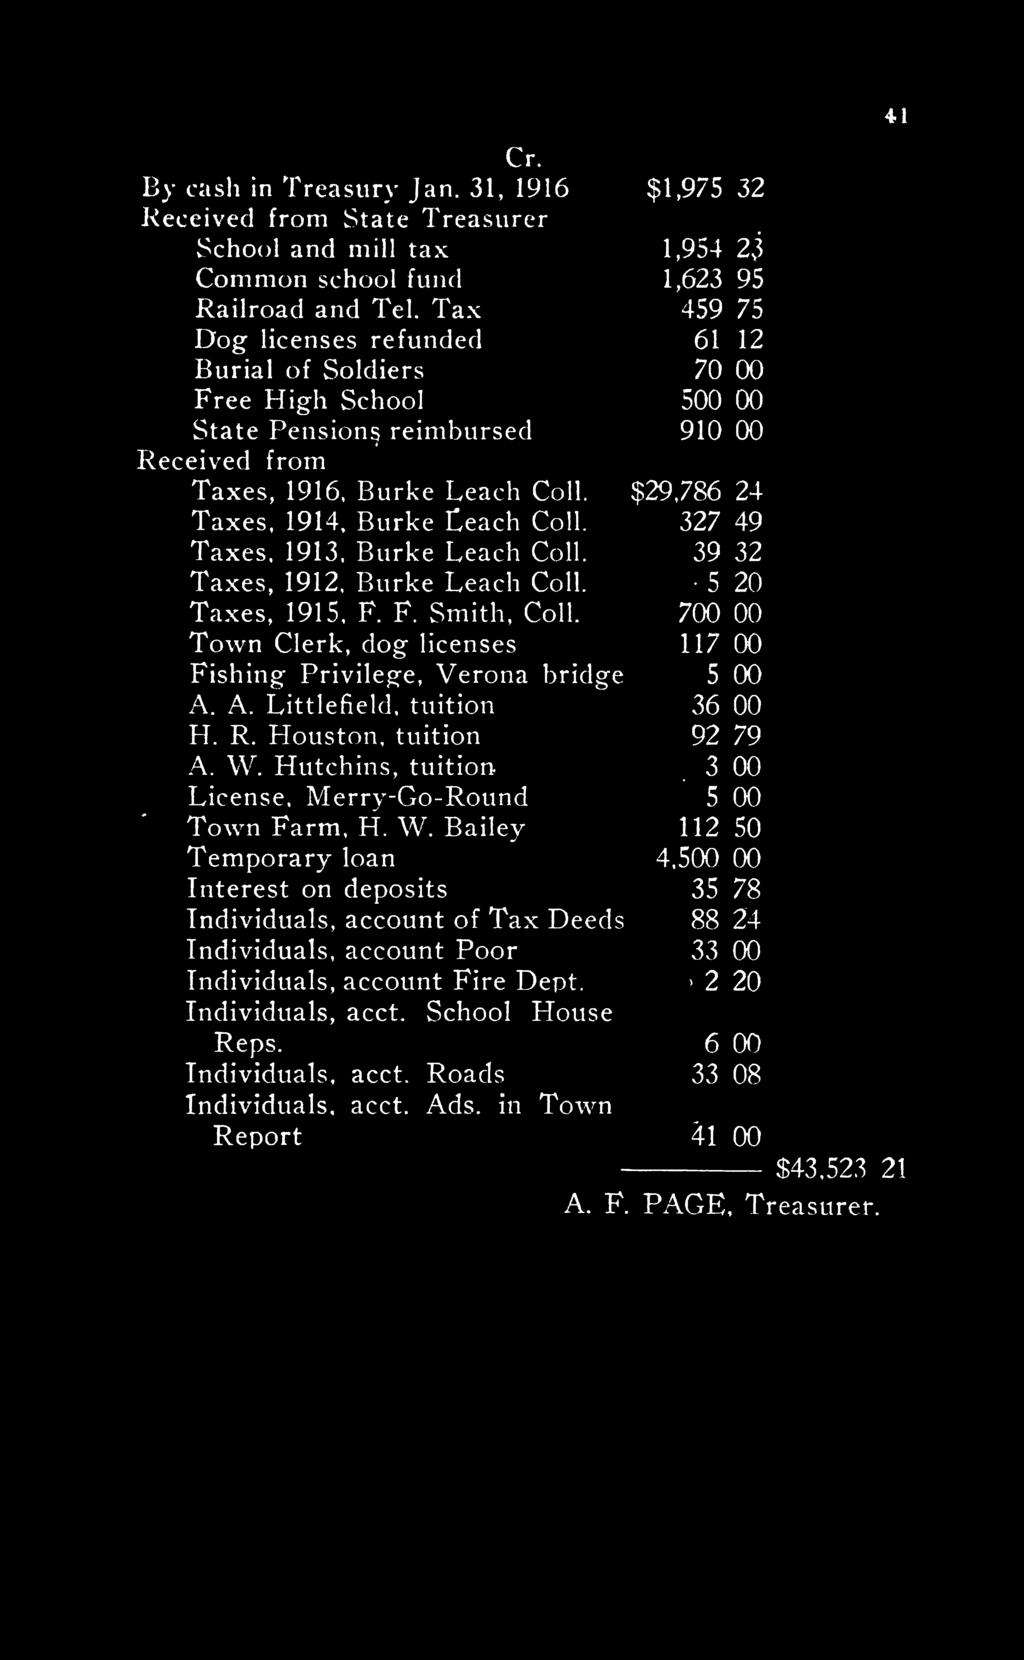 41 Cr. By cash in Treasury Jan. 31, 1916 $1,975 32 School and mill tax 1,954 23 Common school fund 1,623 95 Railroad and Tel.